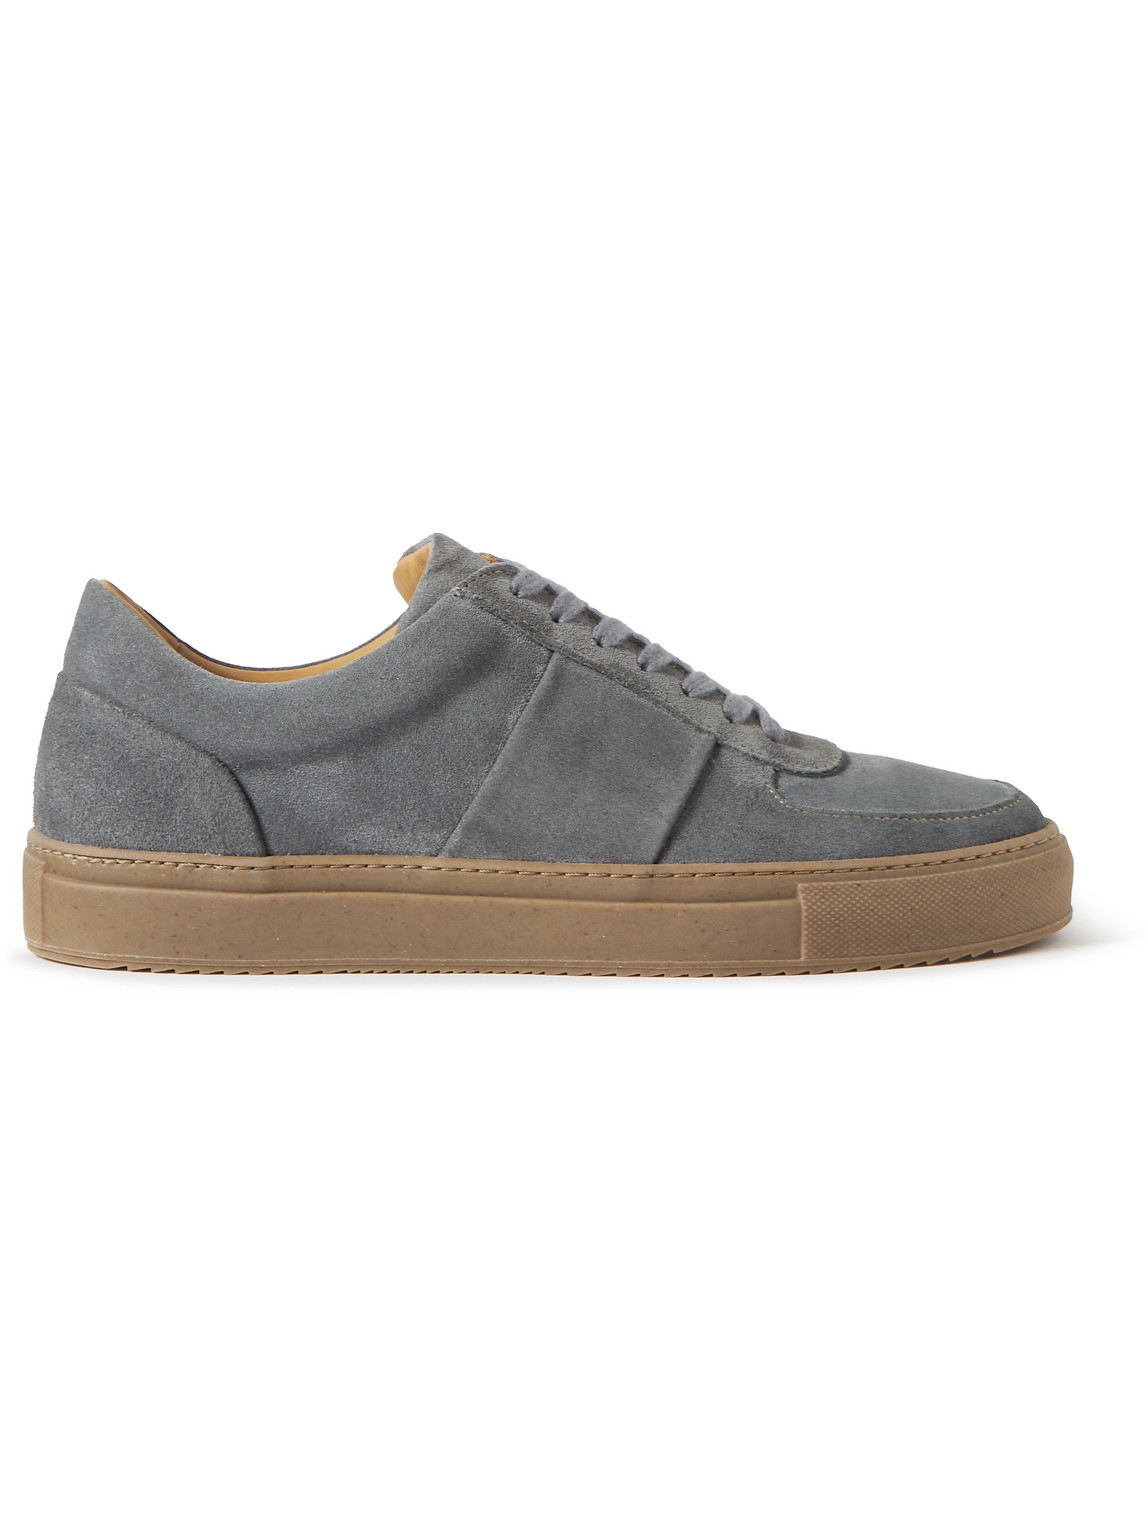 Mr P. Larry Regenerated Suede By Evolo® Sneakers In Gray